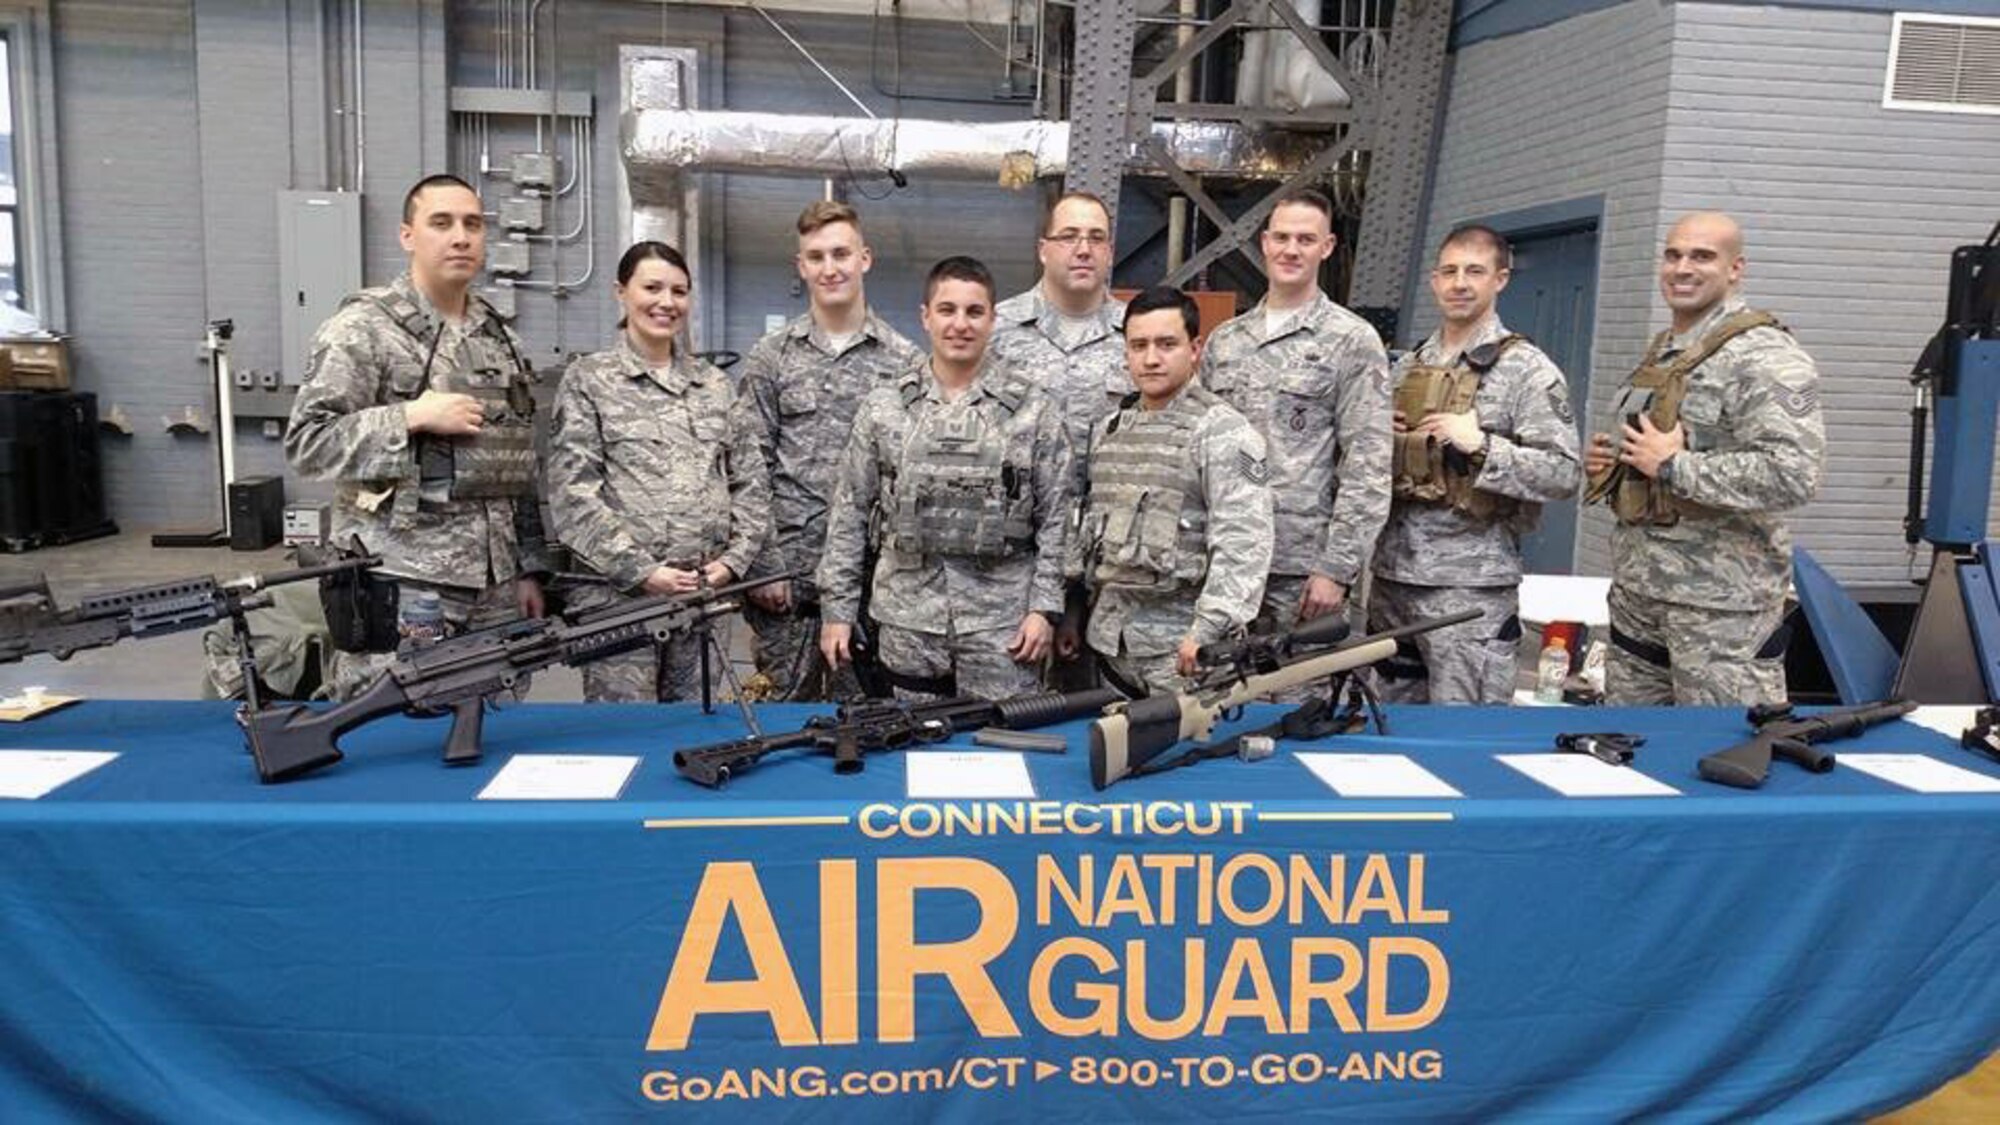 Tech. Sgt. Marvin Perez, Staff Sgt. Monica Cox, Staff Sgt. Brandon Gasiorek, Tech. Sgt. Cody Remy, Senior Master Sgt. Chris Divita, Tech. Sgt. Noah Castro, Staff Sgt. Brian Davies, Master Sgt. Aaron Bowman, and Tech. Sgt. Nick Augelli stand at a weapons display table during a job fair held at the Hartford Armory in Conn. Feb. 27, 2016. (Photo courtesy of Master Sgt. Liz Toth)